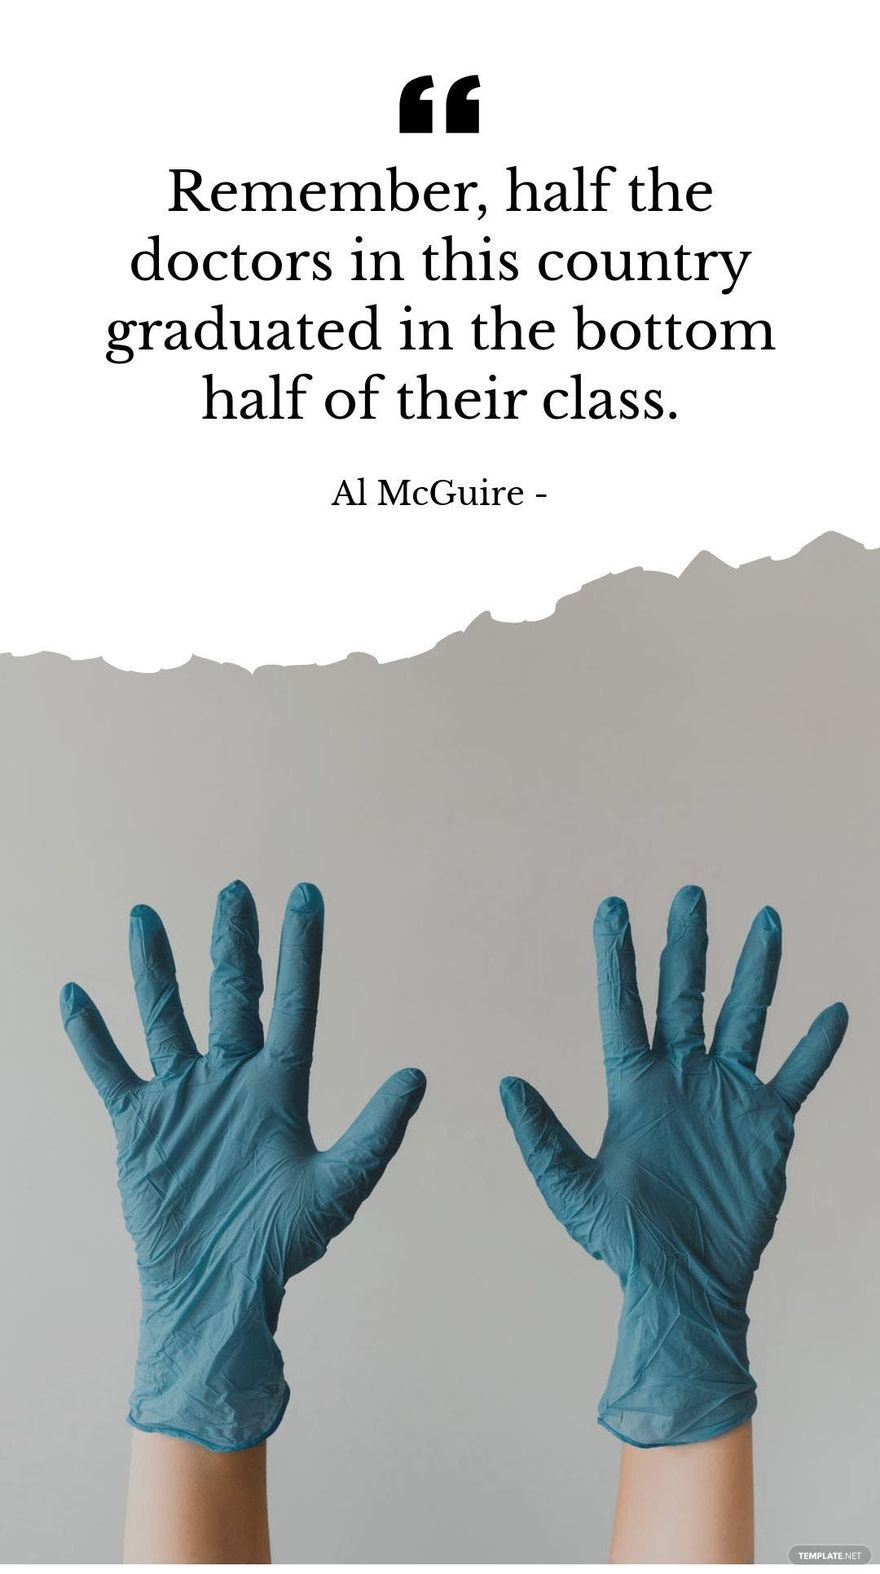 Al McGuire - Remember, half the doctors in this country graduated in the bottom half of their class.